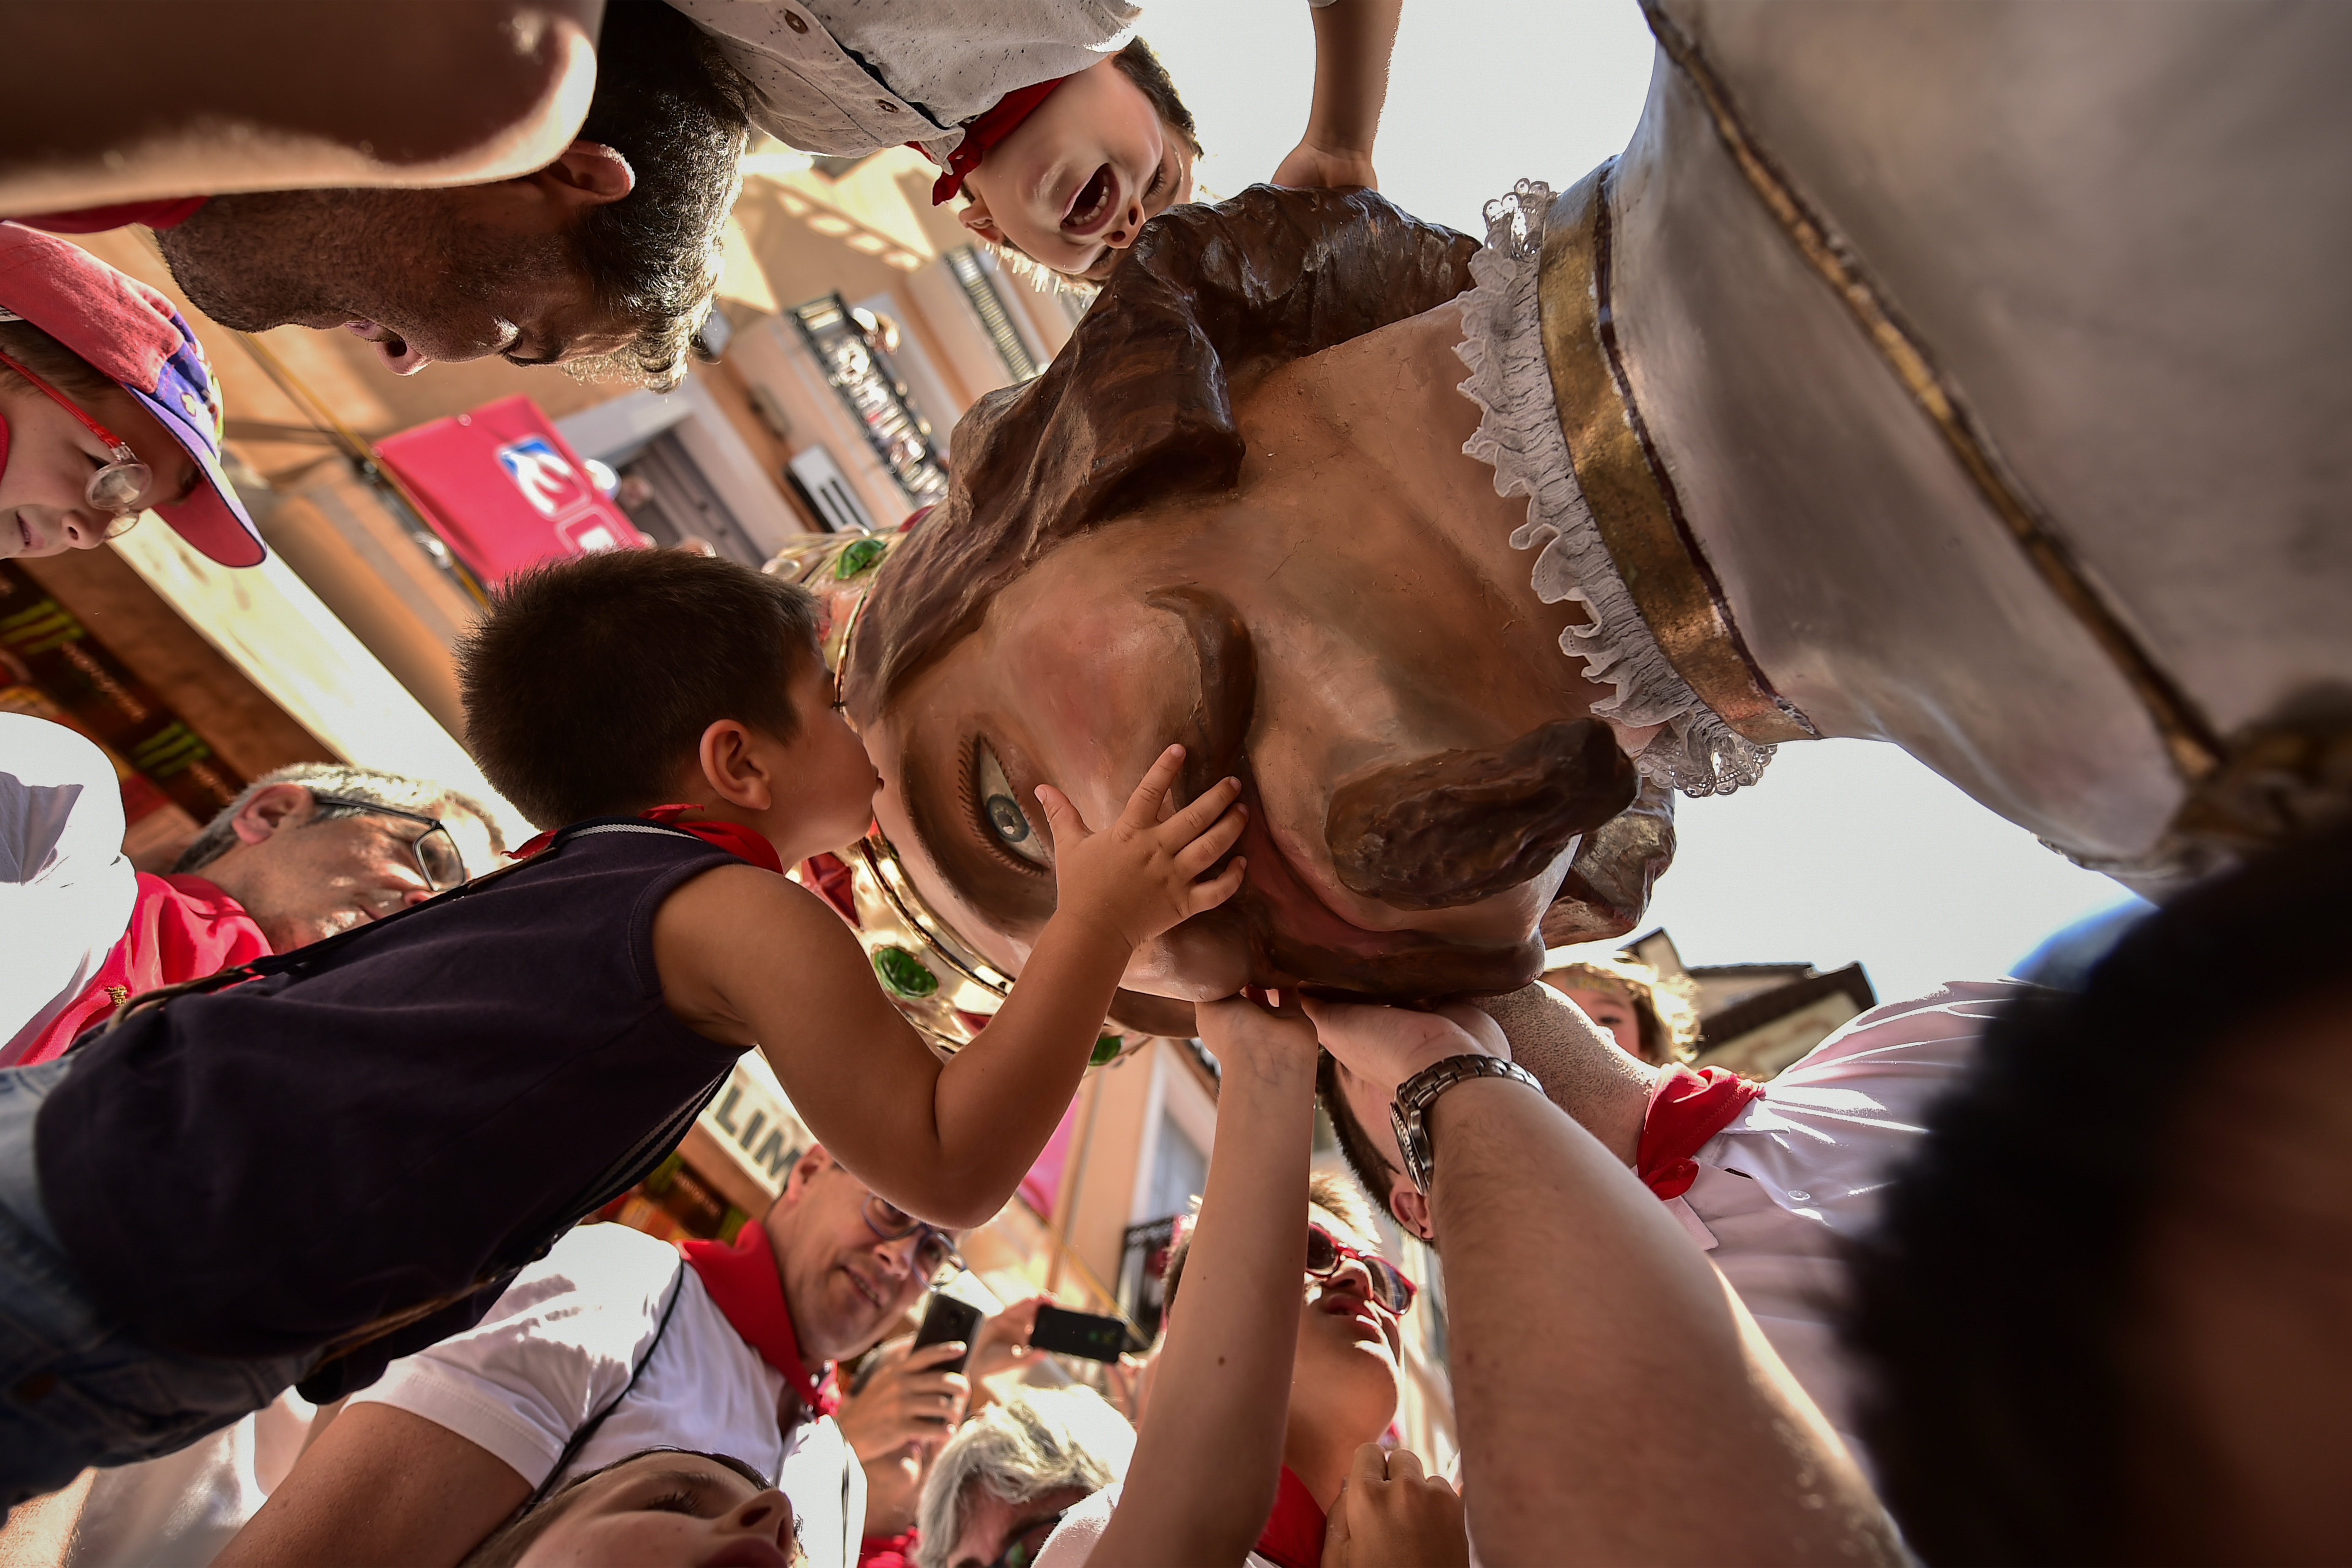 EDS NOTE : SPANISH LAW REQUIRES THAT THE FACES OF MINORS ARE MASKED IN PUBLICATIONS WITHIN SPAIN. Children say goodbye to a giant of San Fermin's Comparsa Parade at the San Fermin Festival in Pamplona, northern Spain, Sunday July 14, 2018. Revellers from around the world flock to Pamplona every year to take part in the eight days of the running of the bulls. (AP Photo/Alvaro Barrientos)